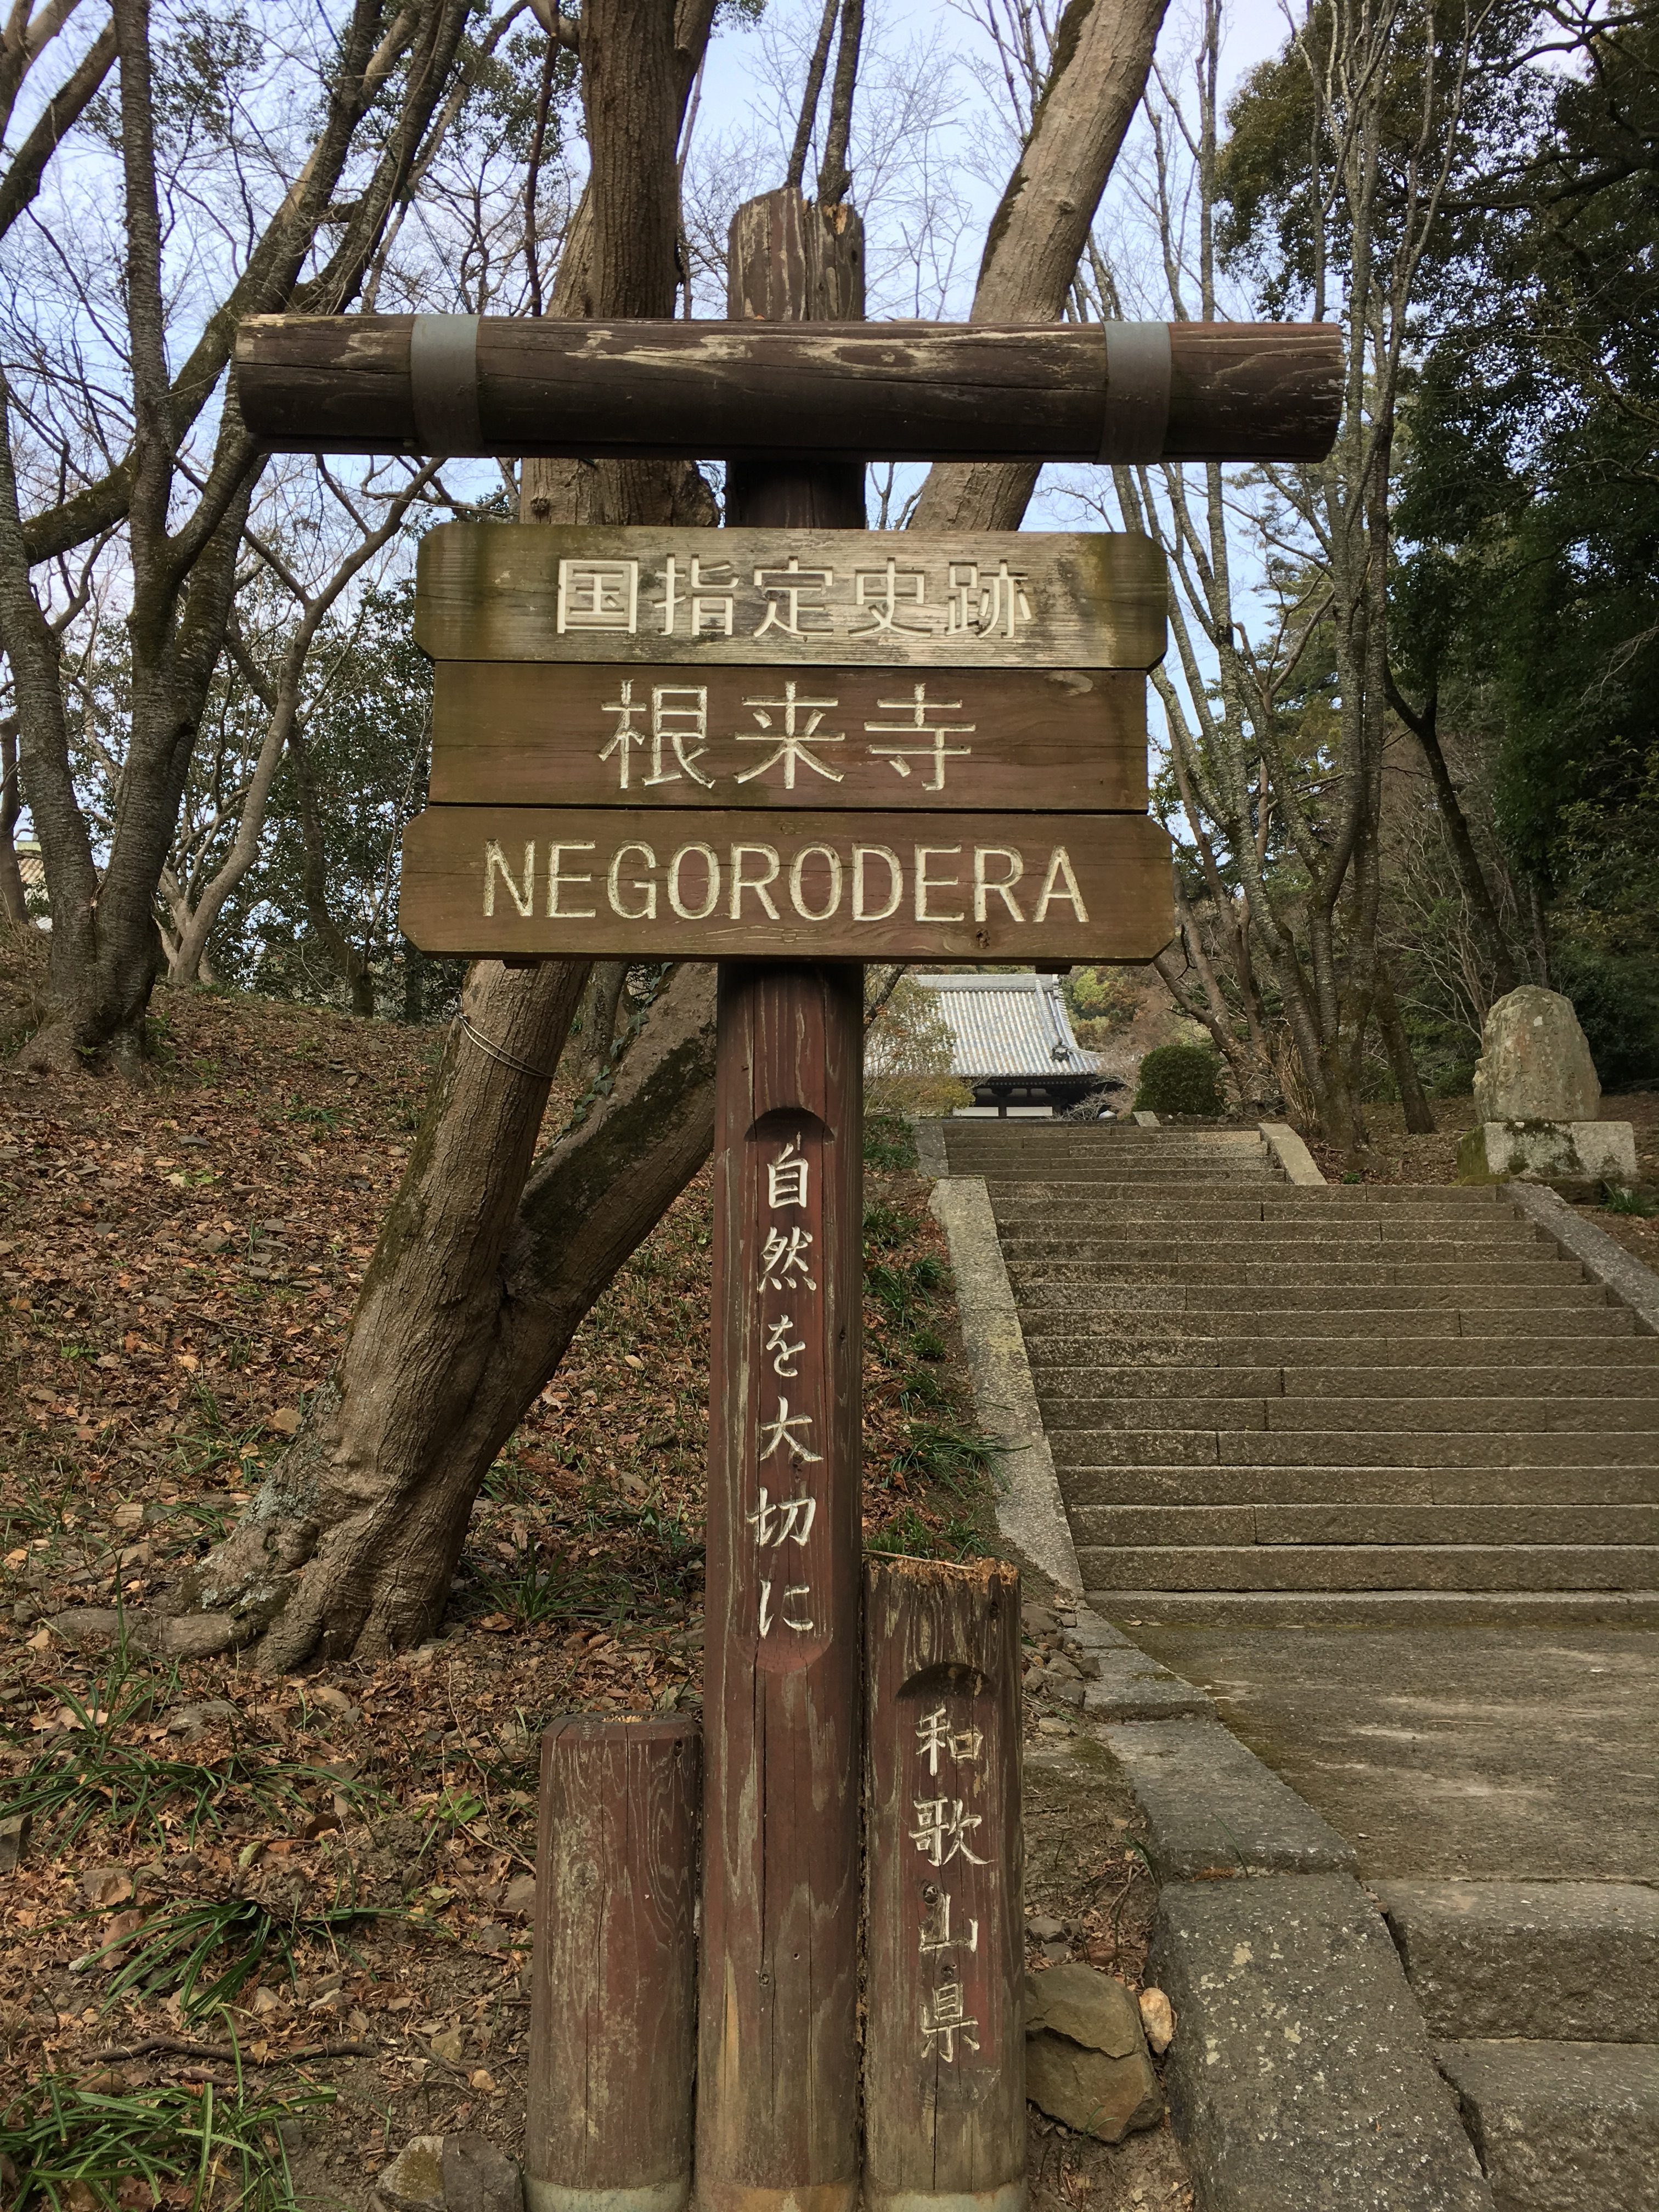 rustic wooden sign next to stone stairs that reads Negoeo-dera